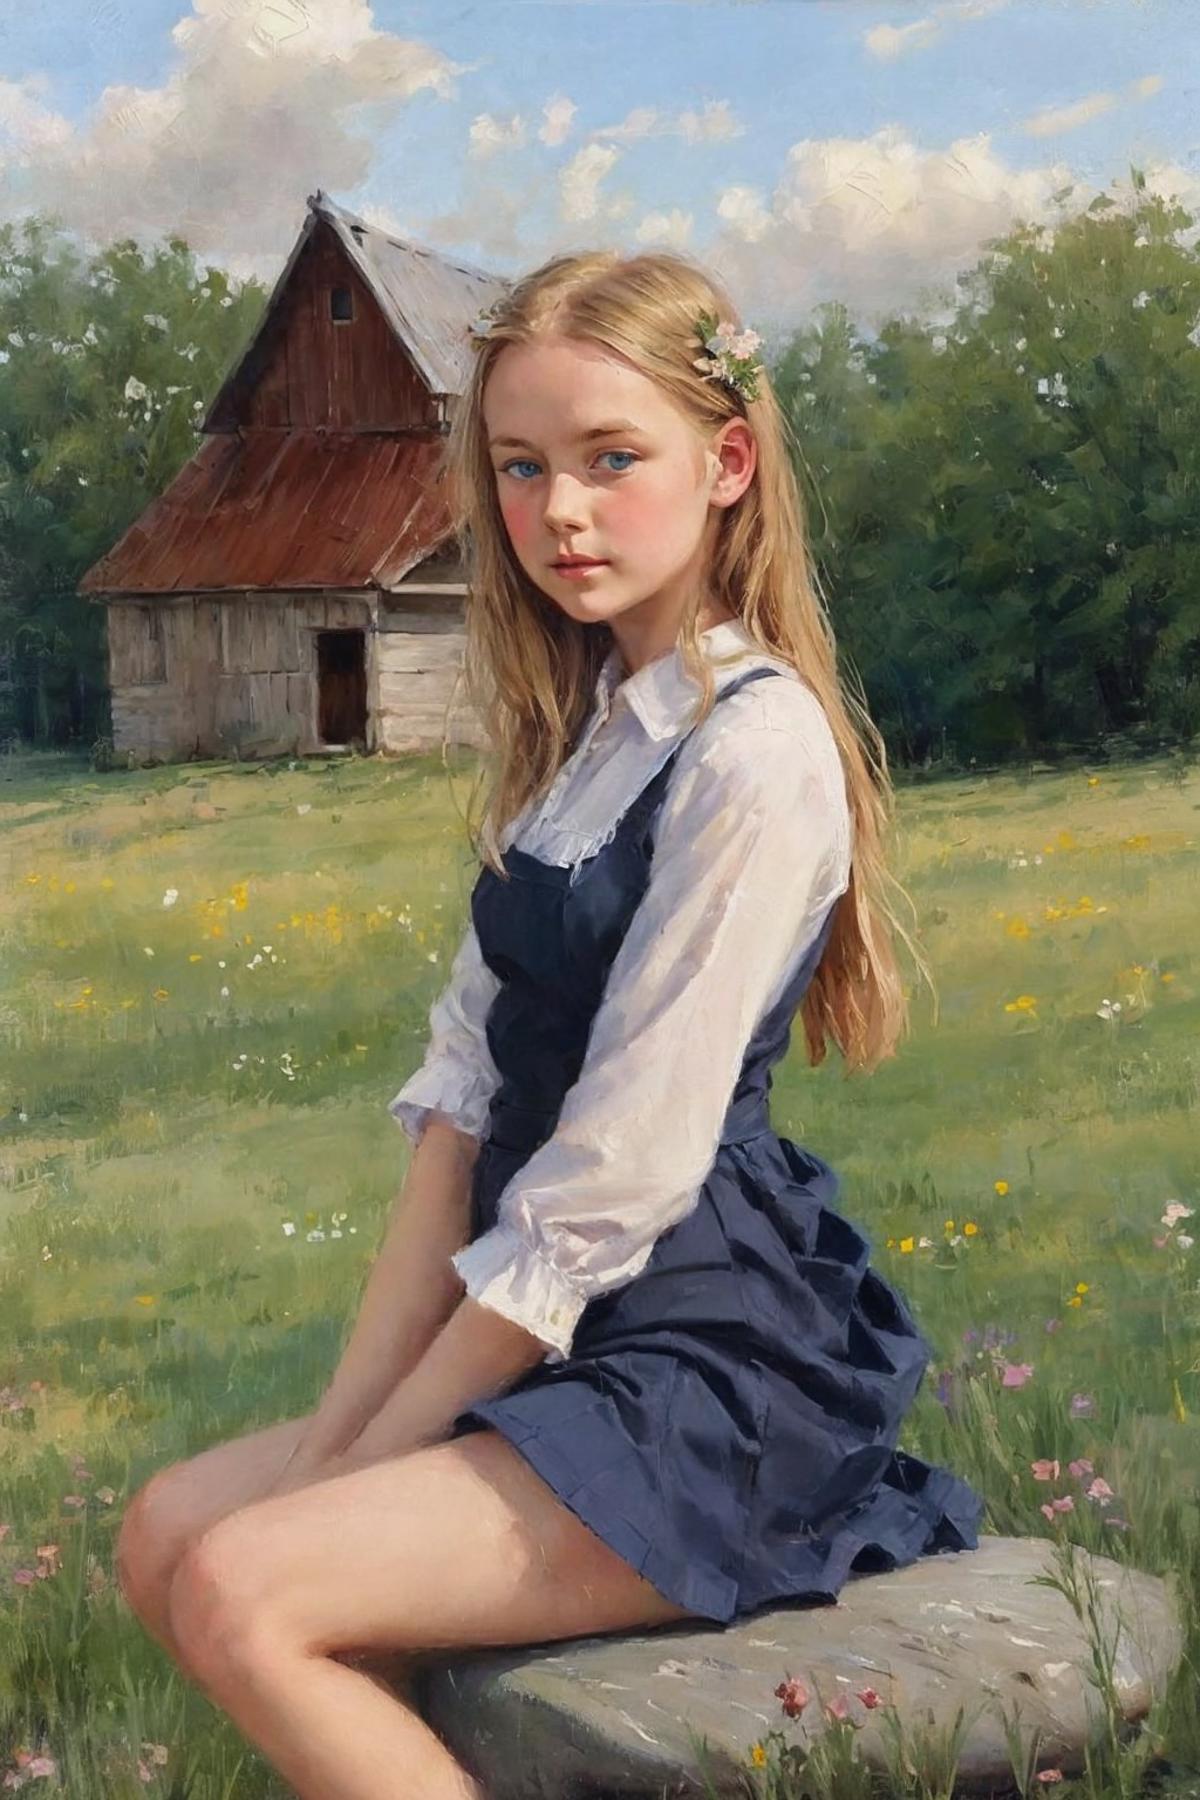 A Little Girl with Blonde Hair and a Blue Dress Sitting in a Field.